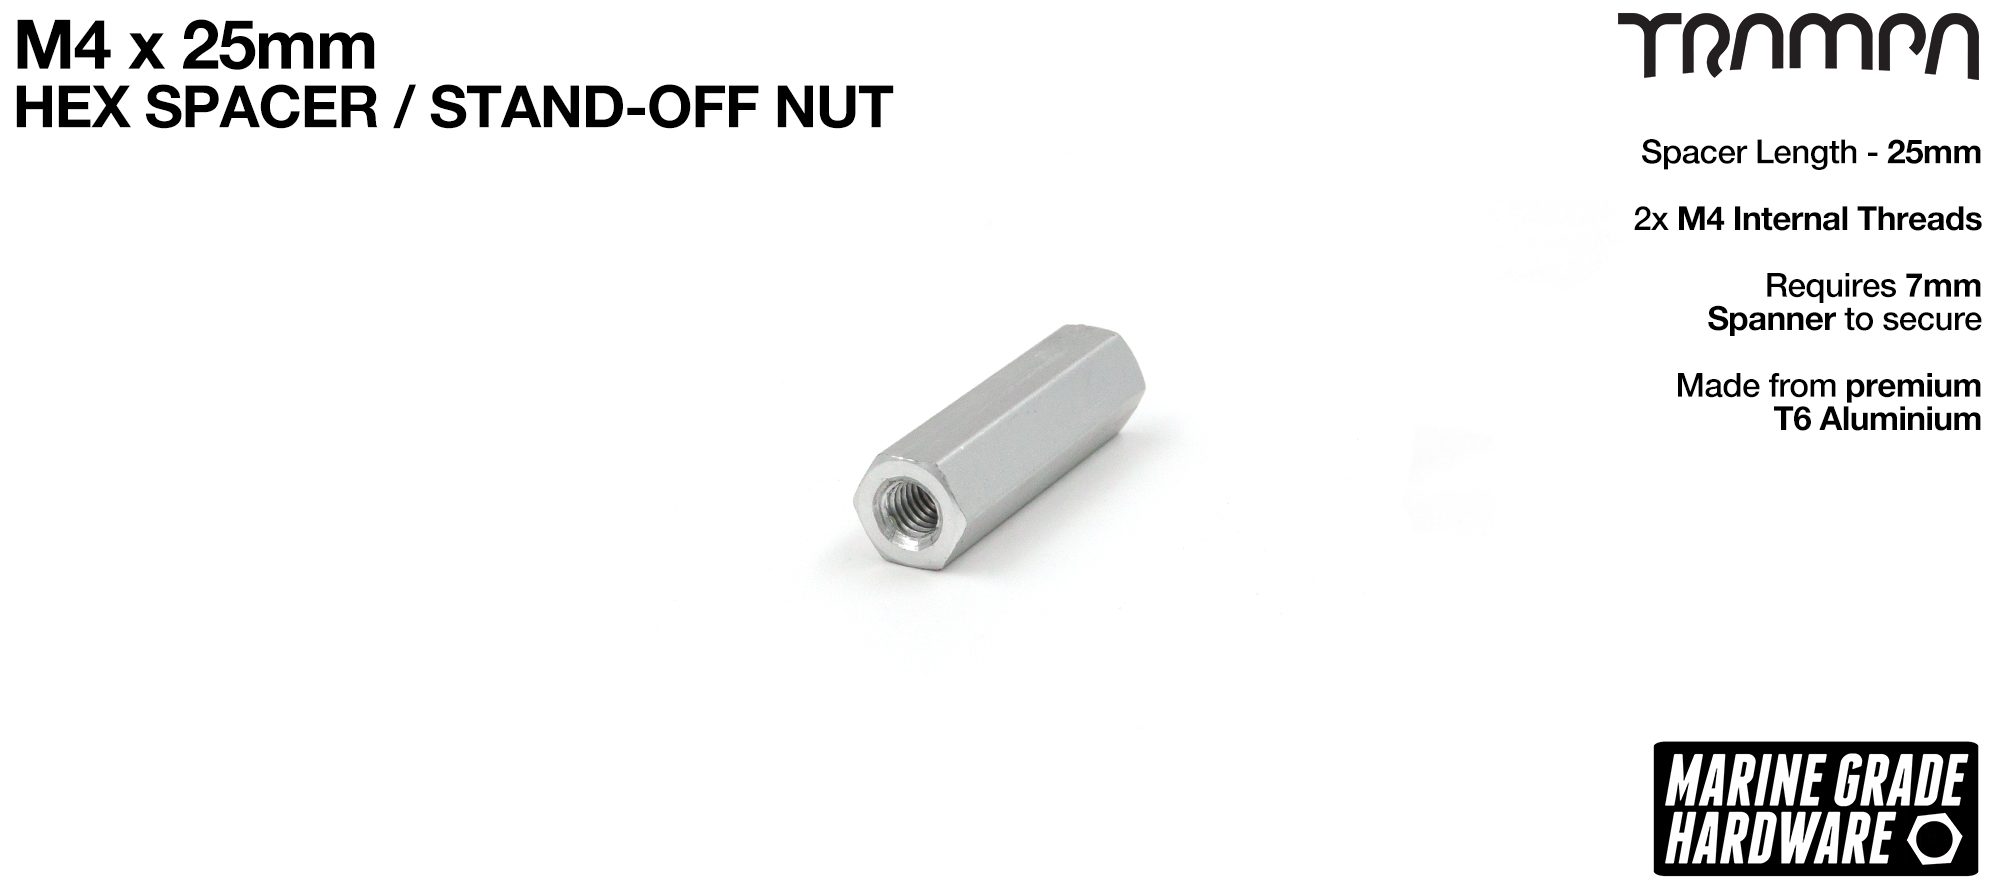 M4 x 25mm Threaded Spacer Nut stand off - Aluminum